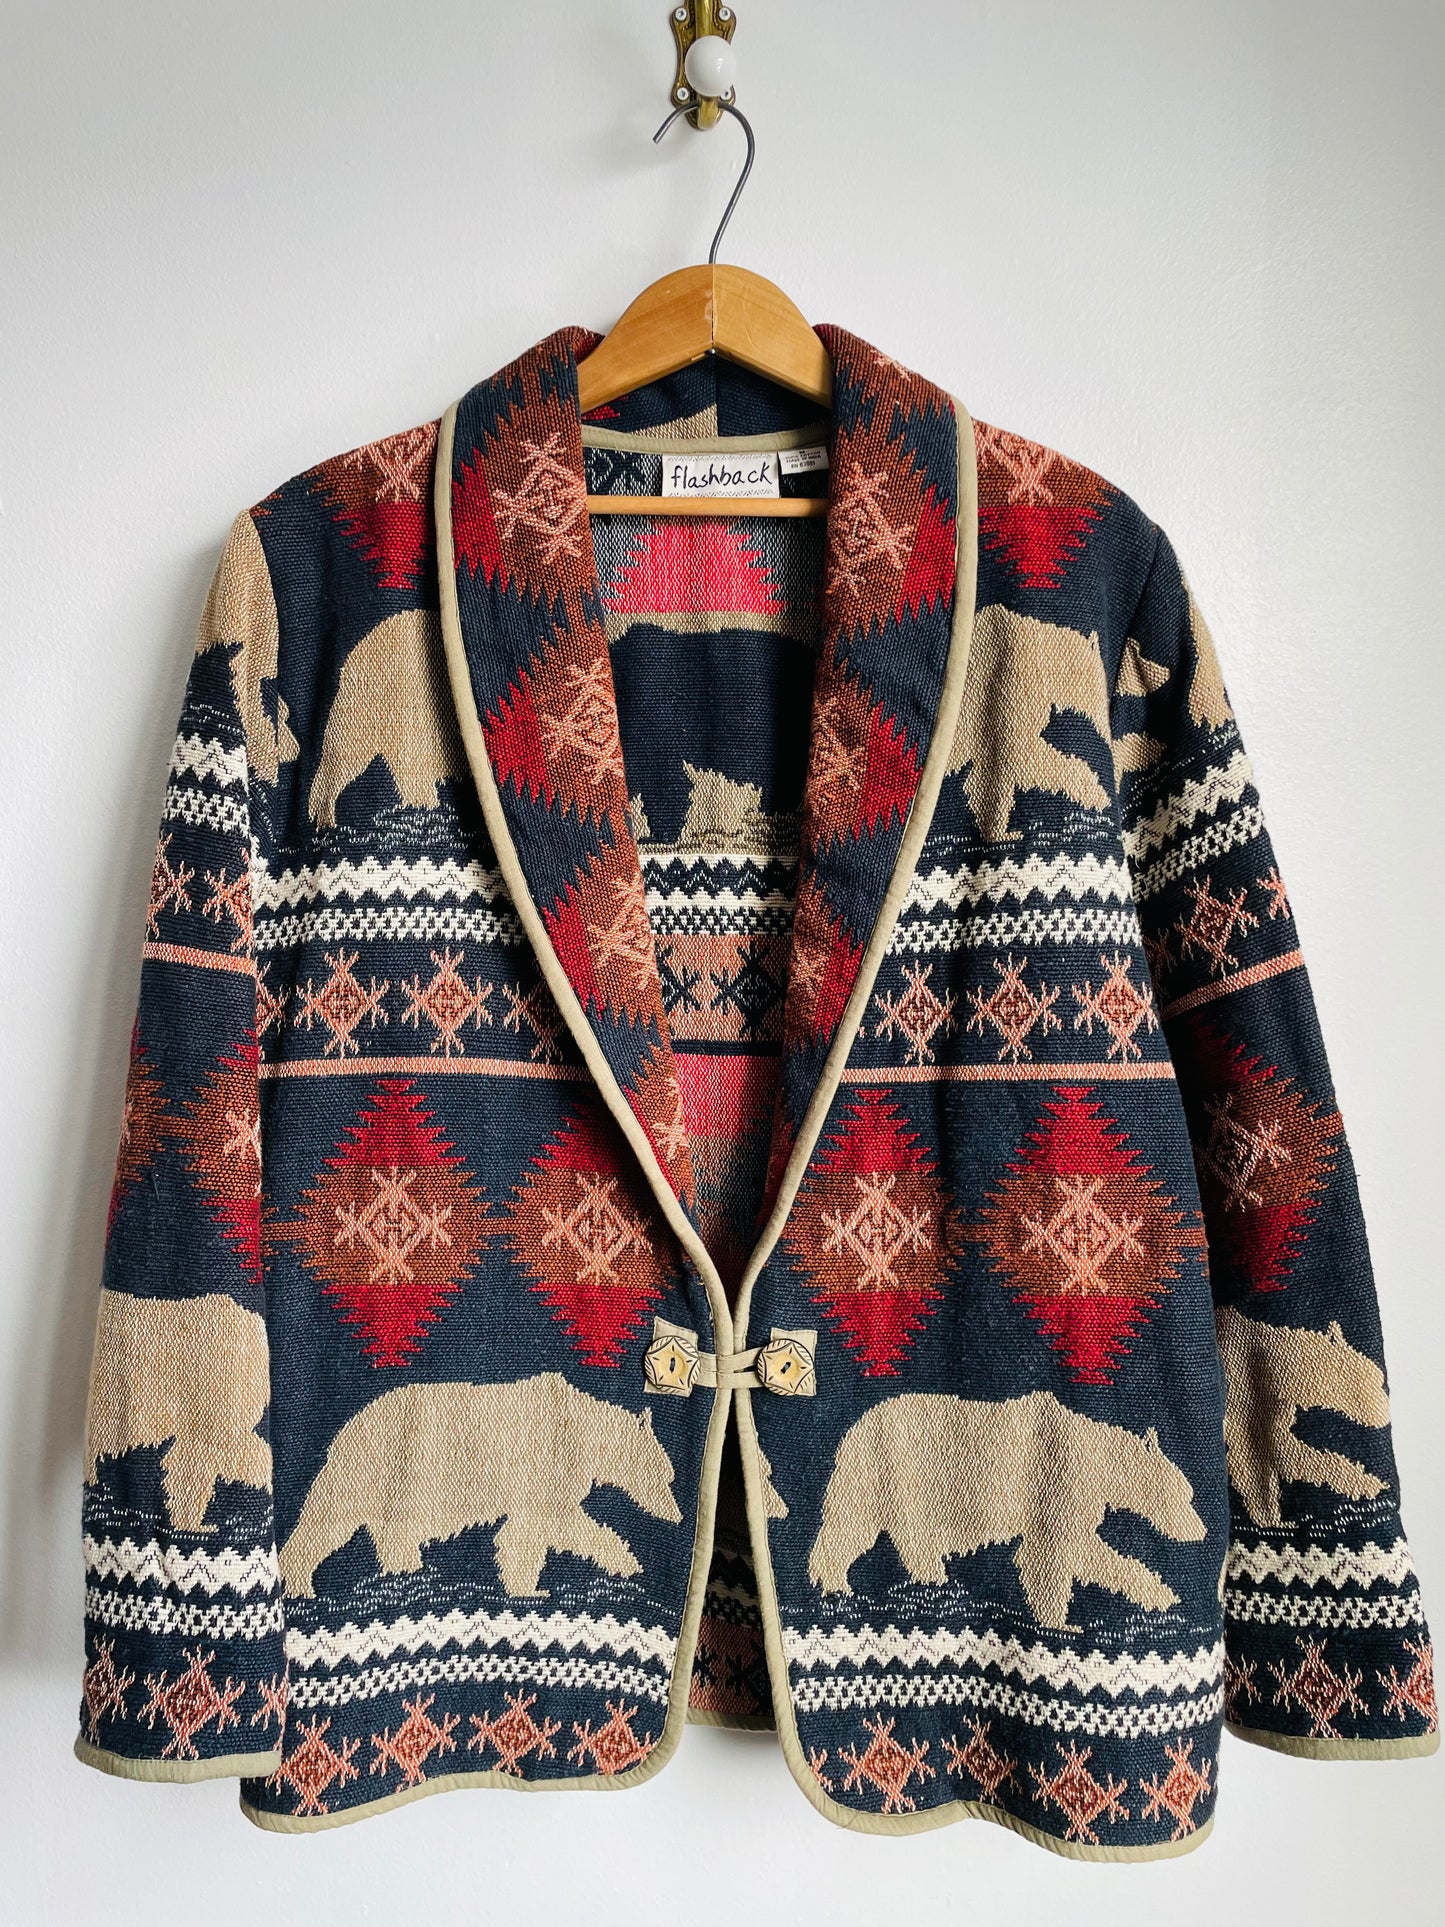 Flashback Tapestry Fabric Jacket with Grizzly Bear Design - 100% Cotton - Made in India